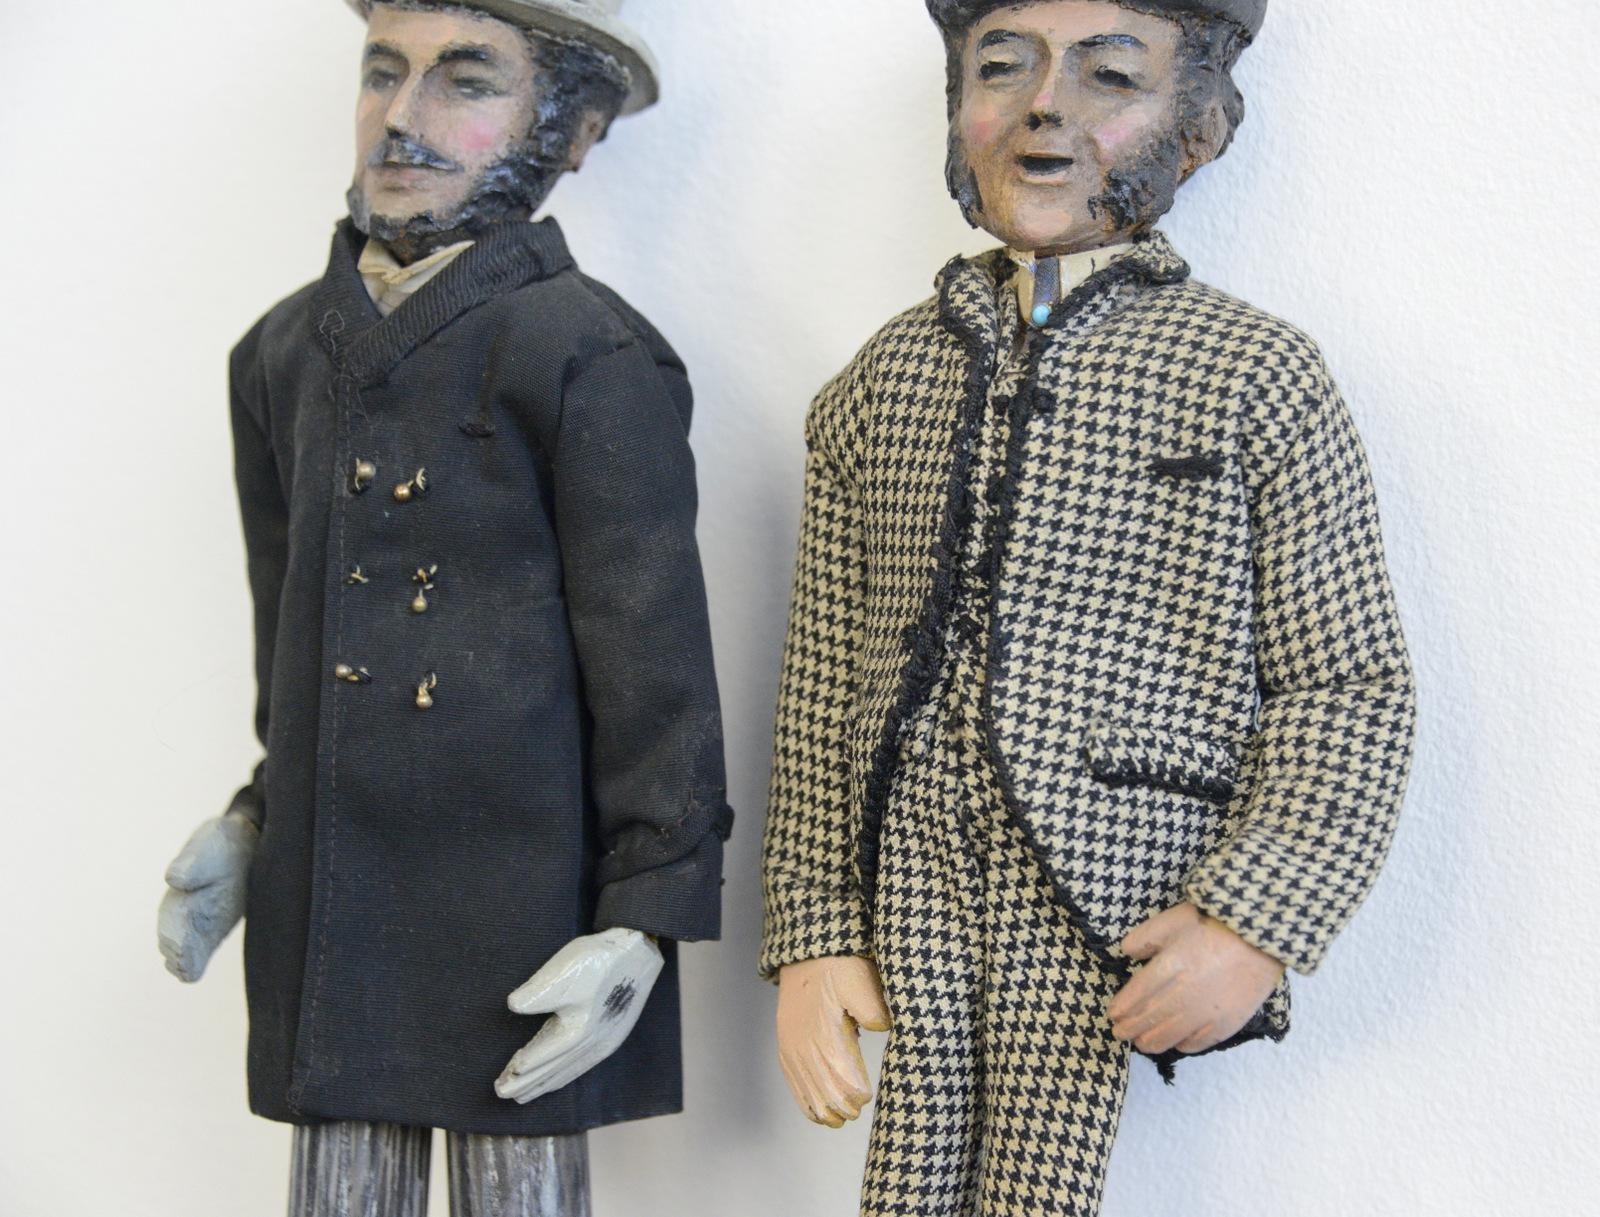 Late 19th century Folk Art figures

- Price is for the pair
- Handmade clothes
- Made from wood and plaster
- Articulated arms and legs
- English, 1890-1900
- Measures: 33cm tall x 11cm wide x 5cm deep

Condition report:

Some small bits